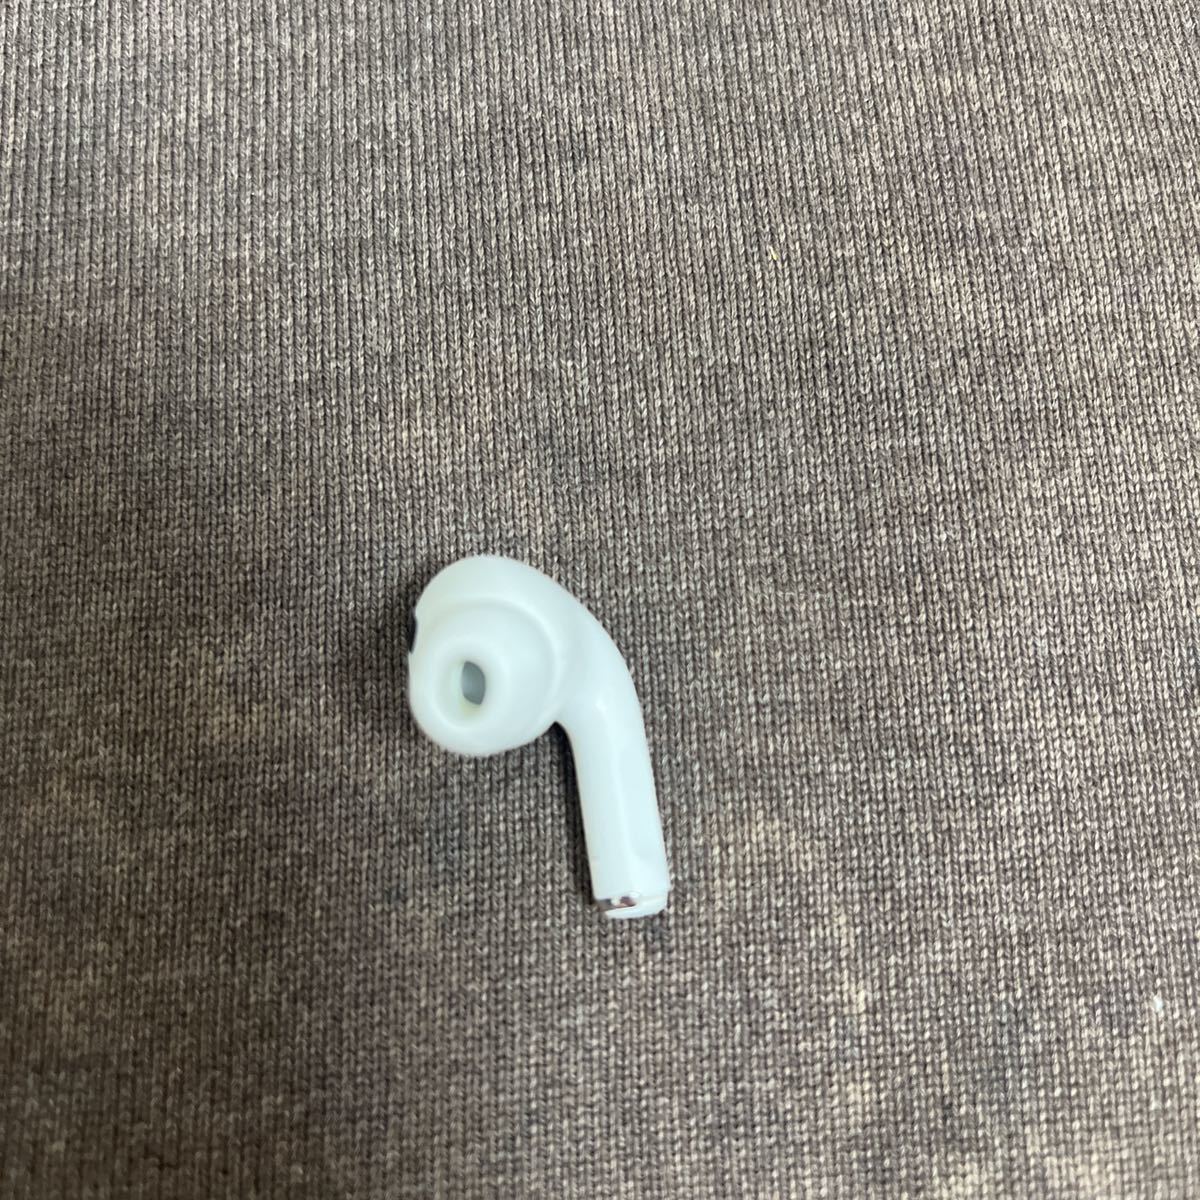 Apple純正 AirPods Pro 左 イヤホン MWP22J/A 左耳のみ 美品 ジャンク product details | Yahoo!  Auctions Japan proxy bidding and shopping service | FROM JAPAN